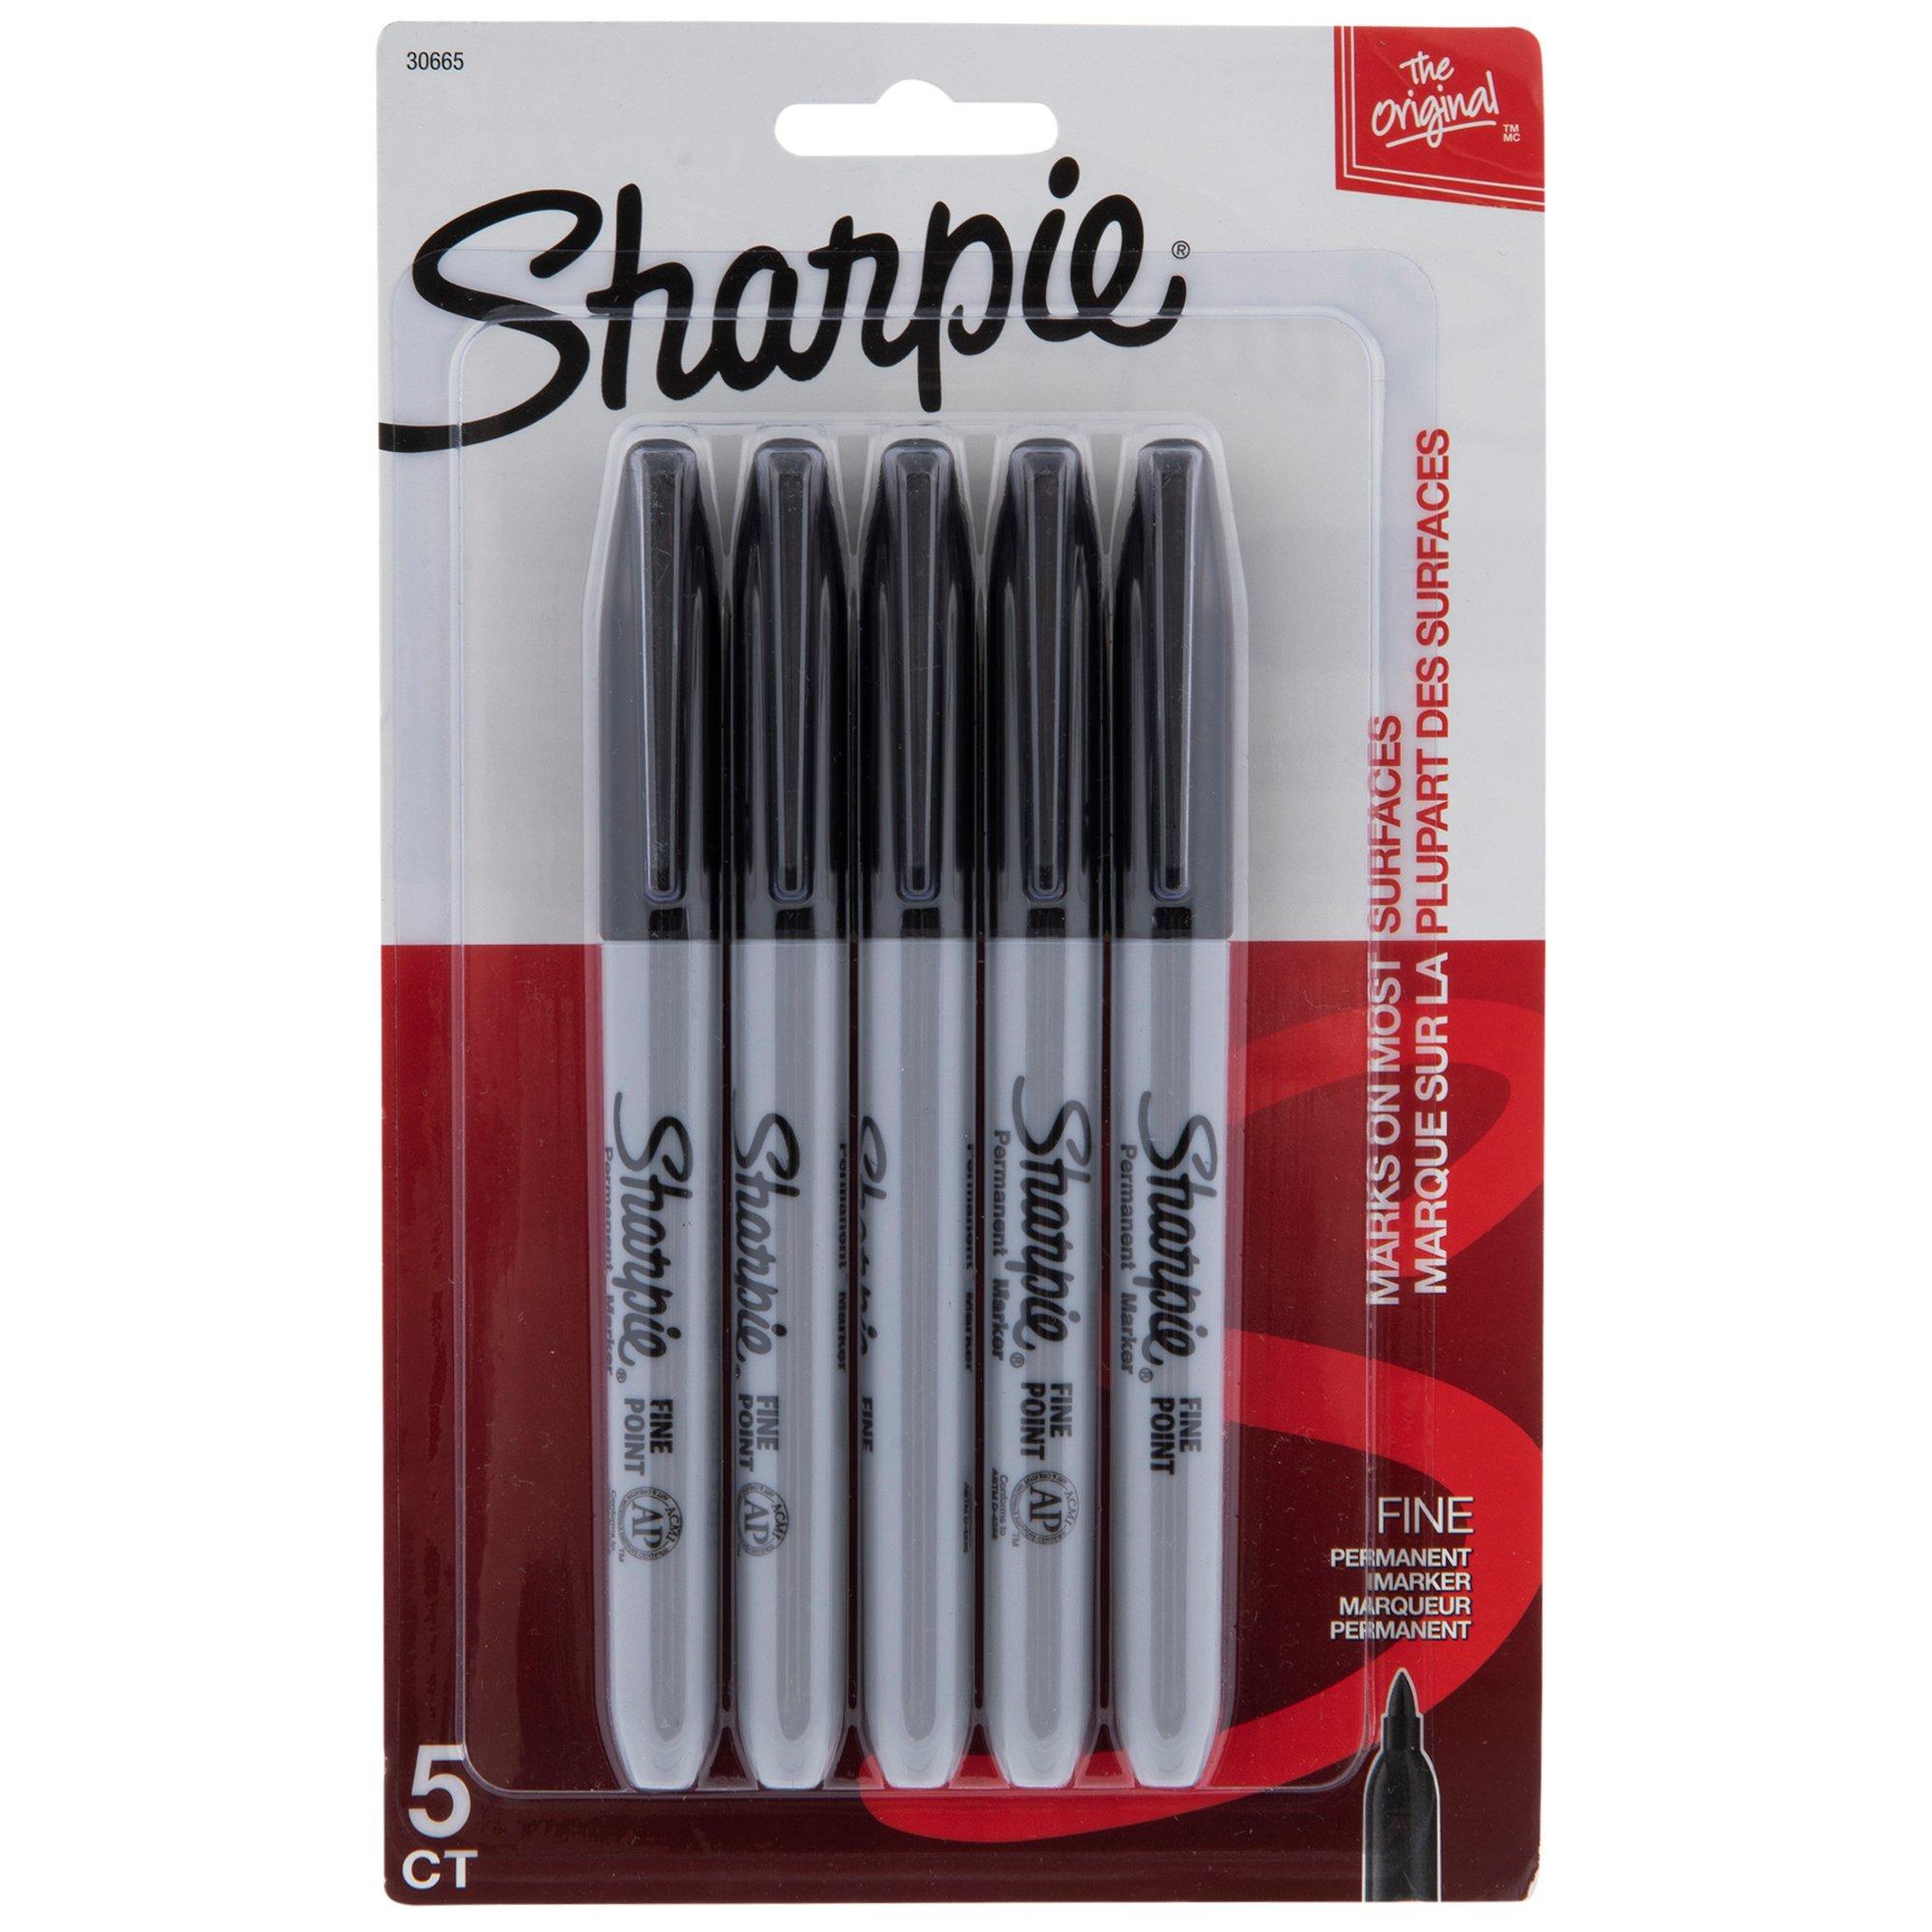  Sharpie Oil-Based Paint Marker, Fine Point, Pack of 3 (Silver)  : Arts, Crafts & Sewing